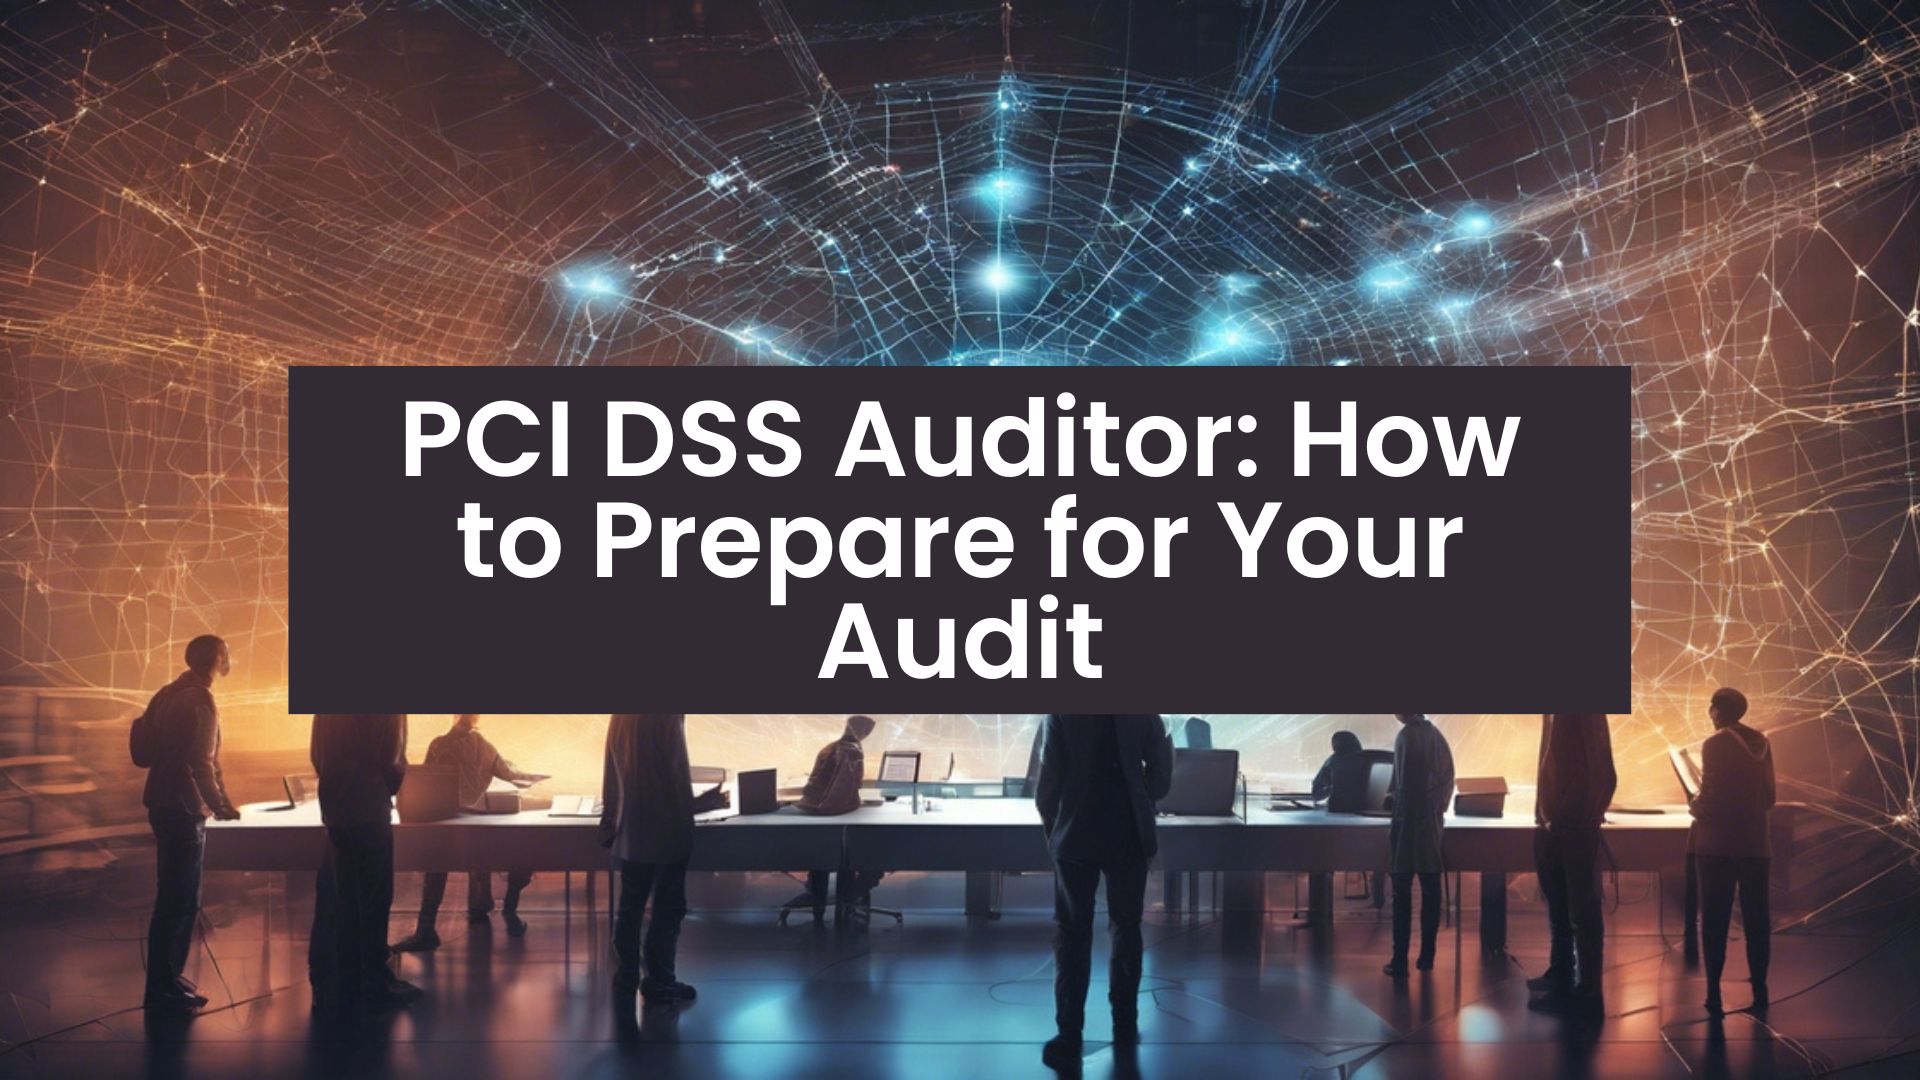 PCI DSS Auditor How to Prepare for Your Audit